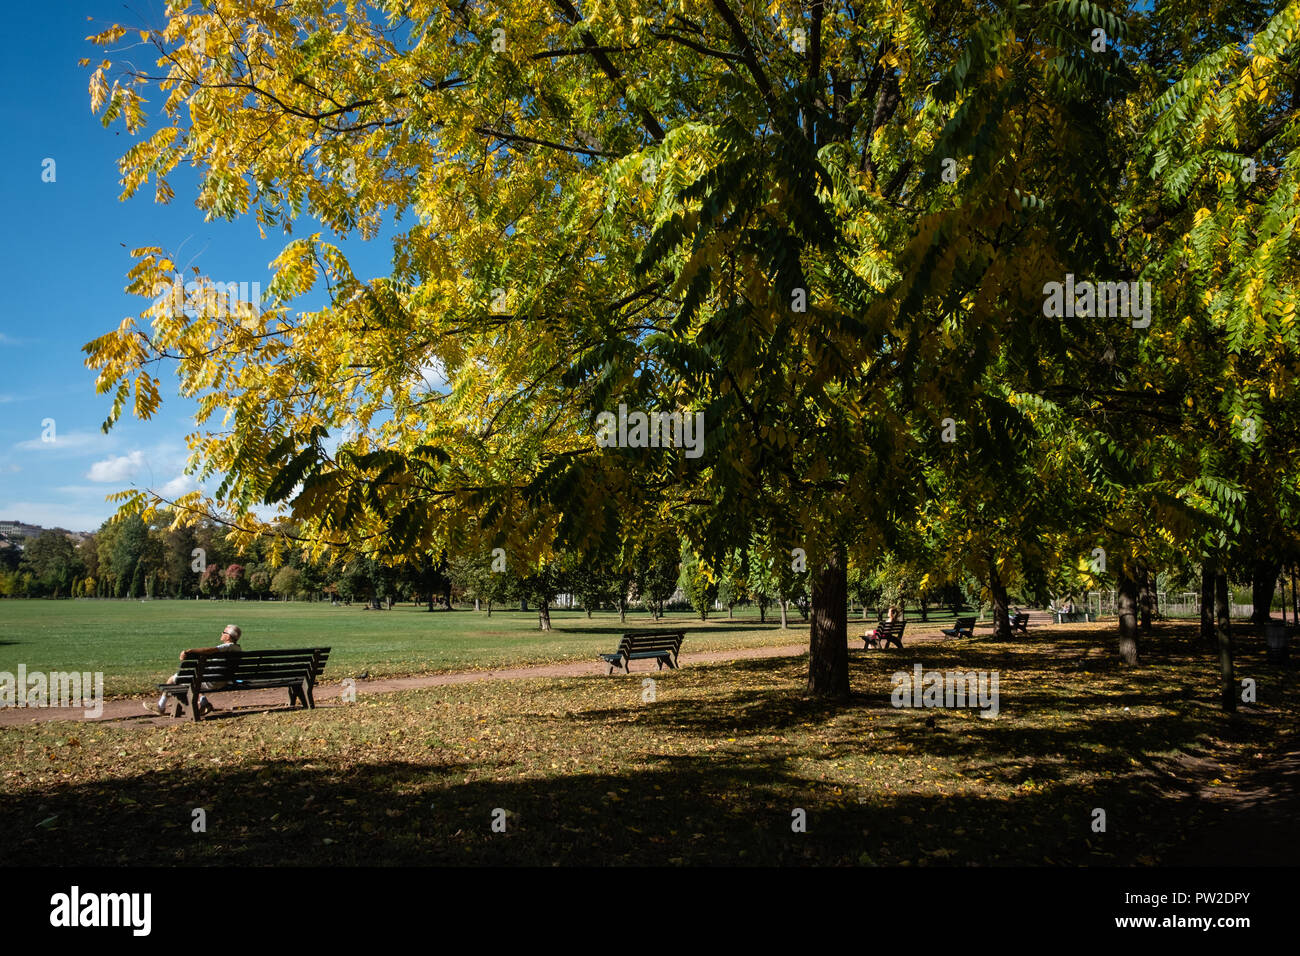 Autumn in the park. A man takes the sun sitting on a bench under trees with yellow leaves Stock Photo